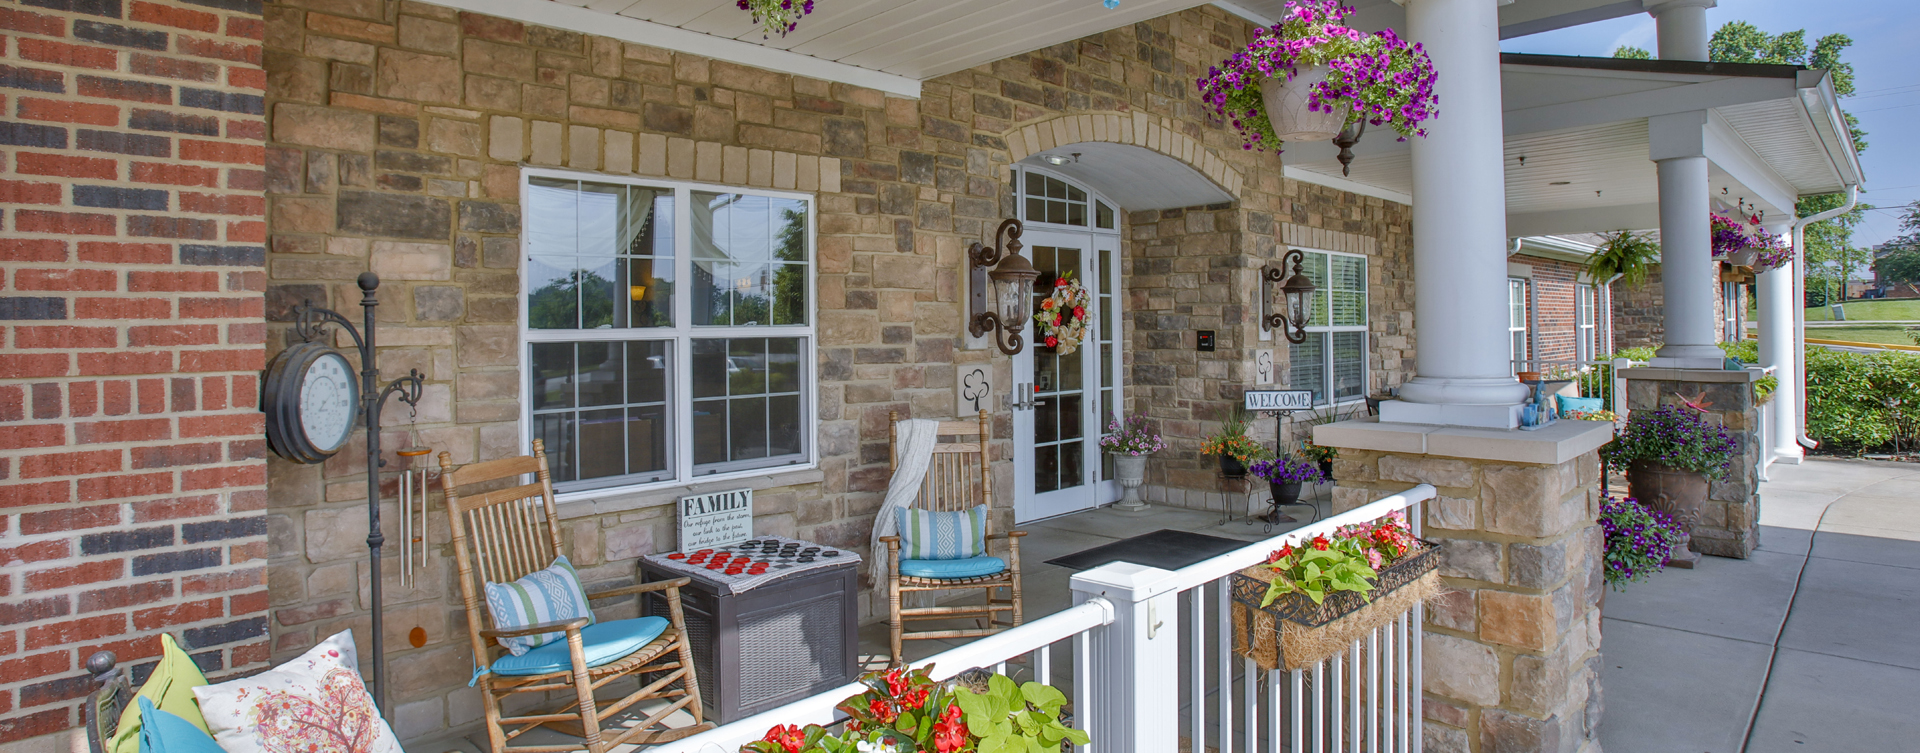 Sip on your favorite drink on the porch at Bickford of Greenwood